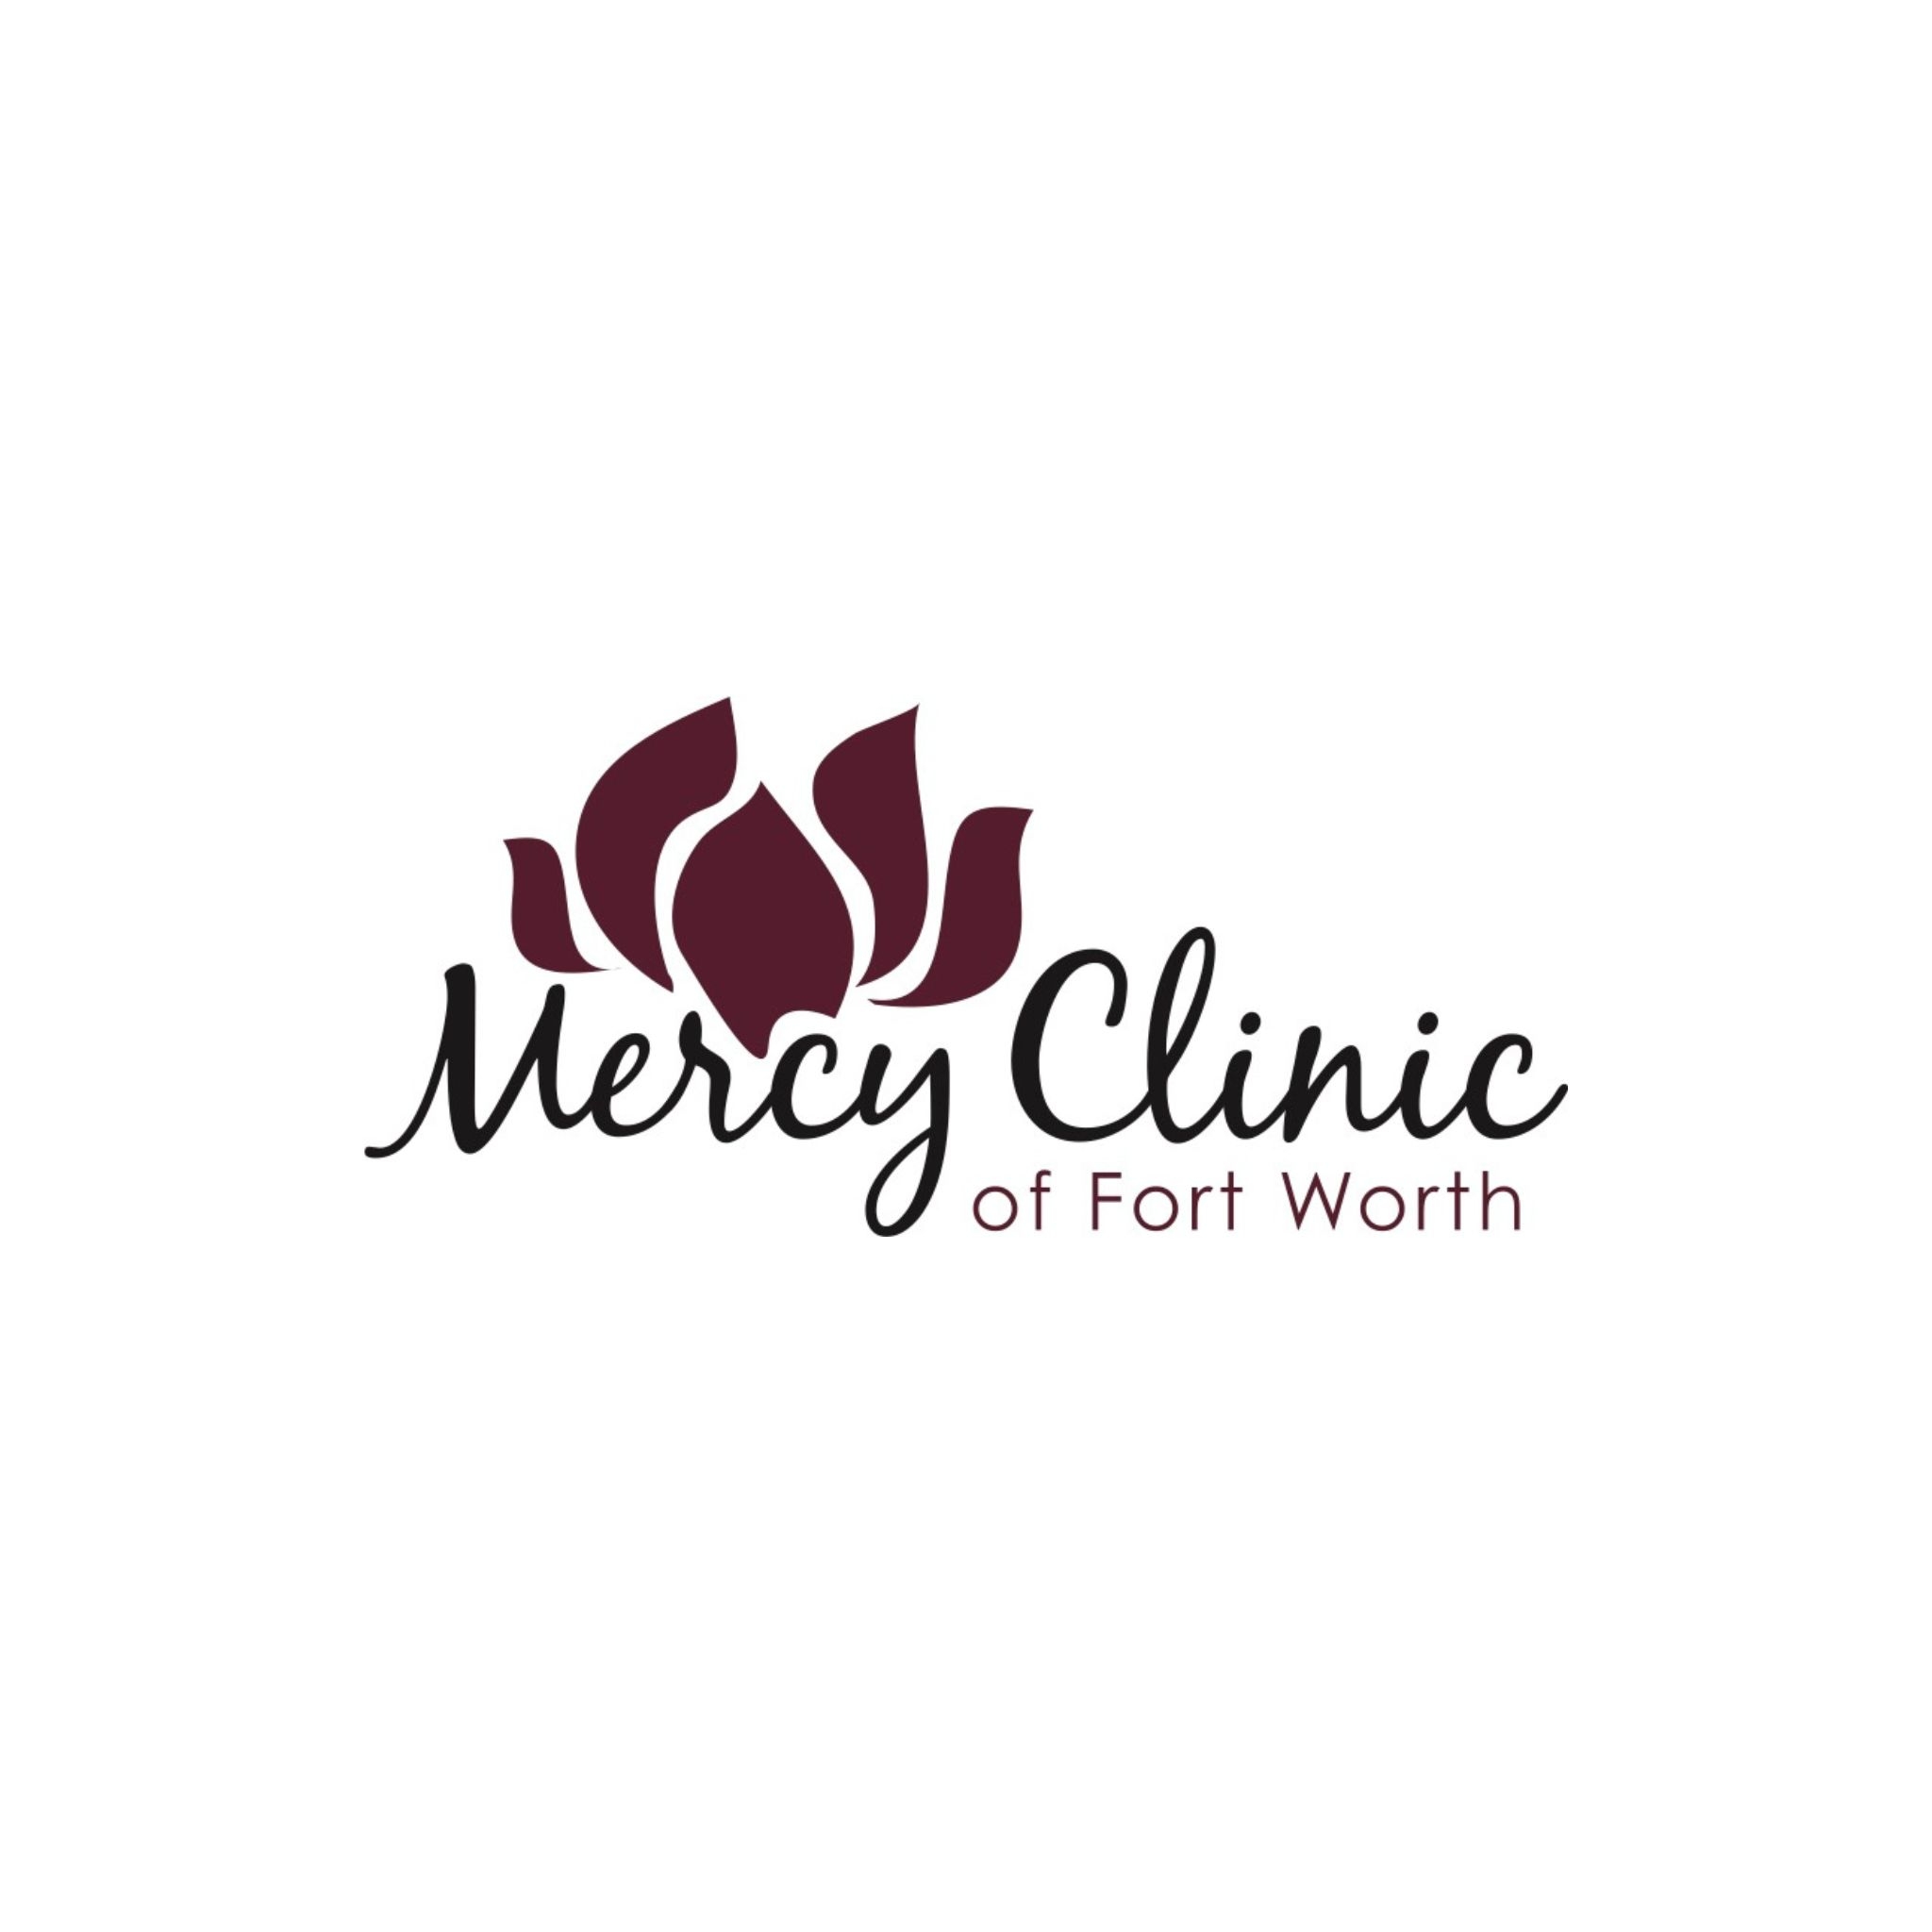 Mercy Clinic of Fort Worth